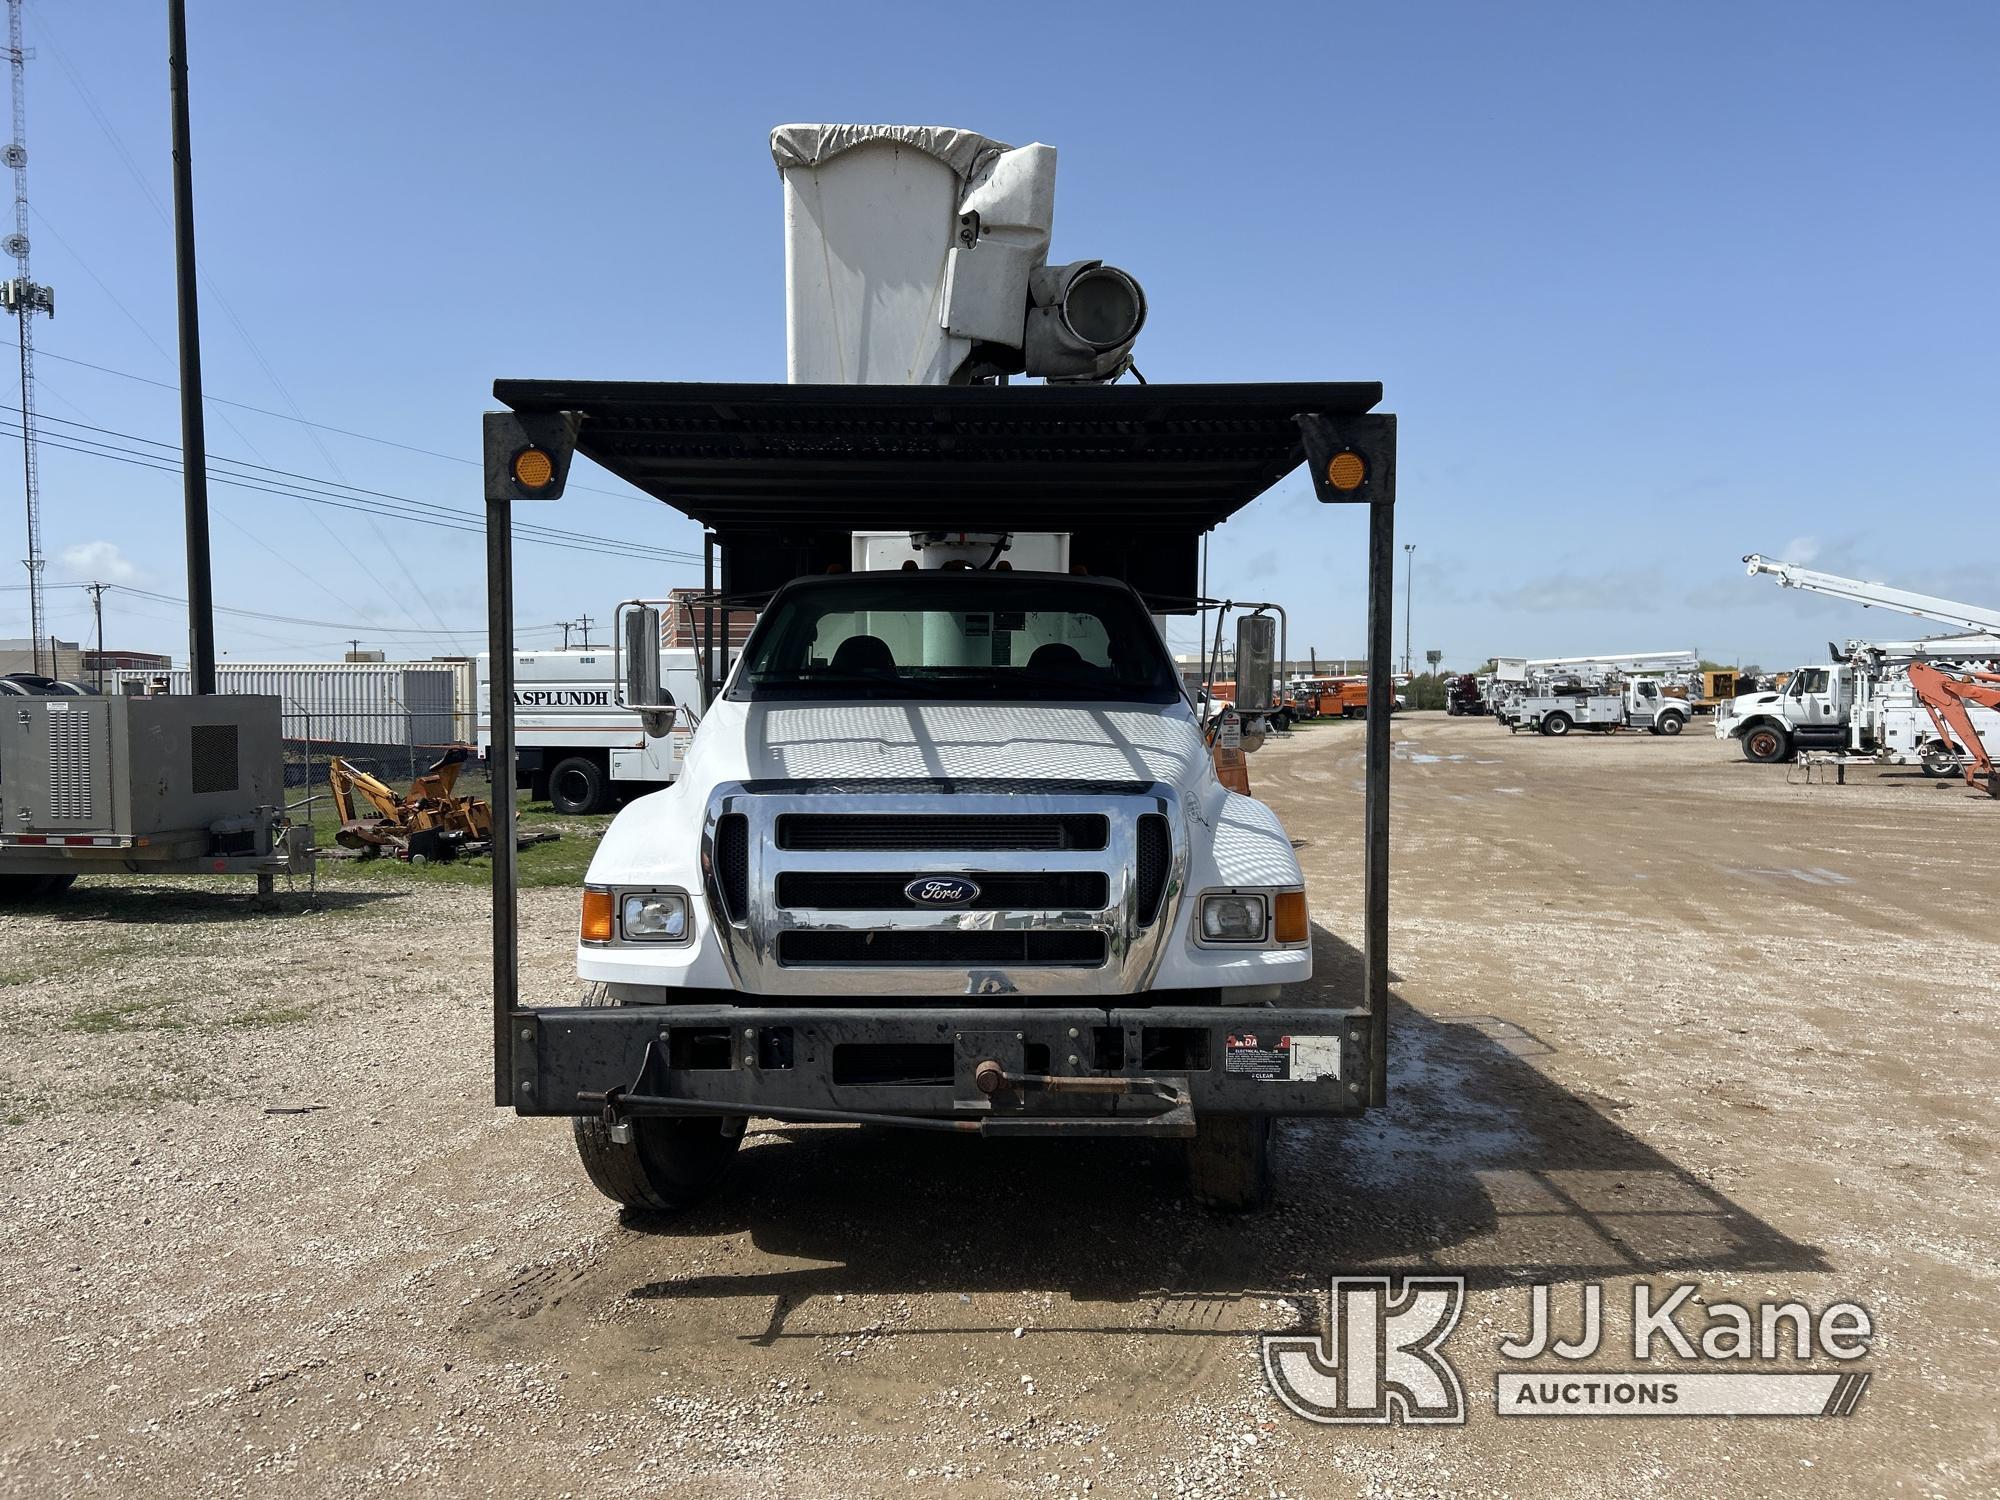 (Waxahachie, TX) Altec LR756, Over-Center Bucket Truck mounted behind cab on 2013 Ford F750 Chipper